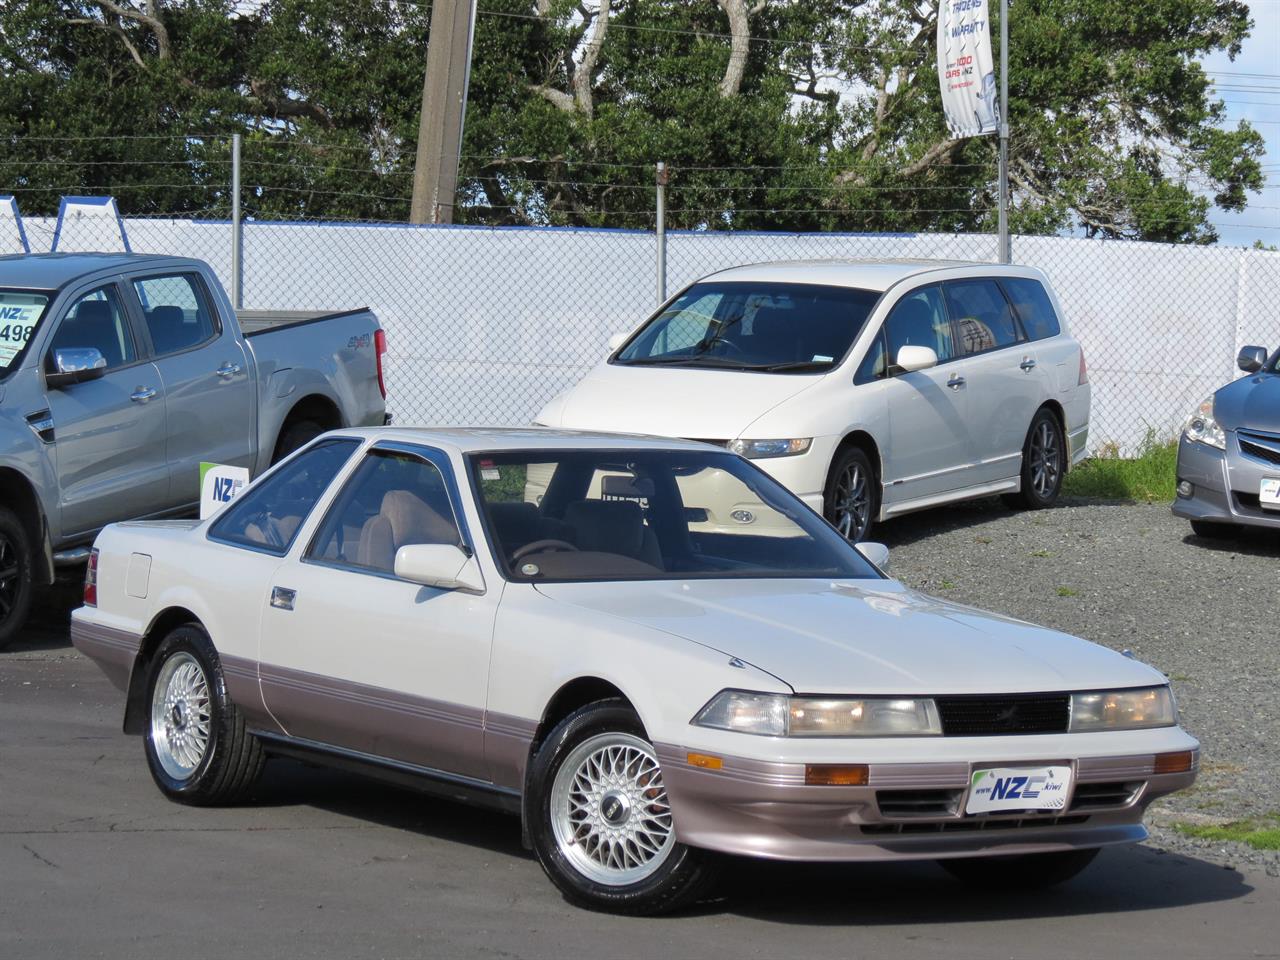 NZC 1988 Toyota SOARER just arrived to Auckland